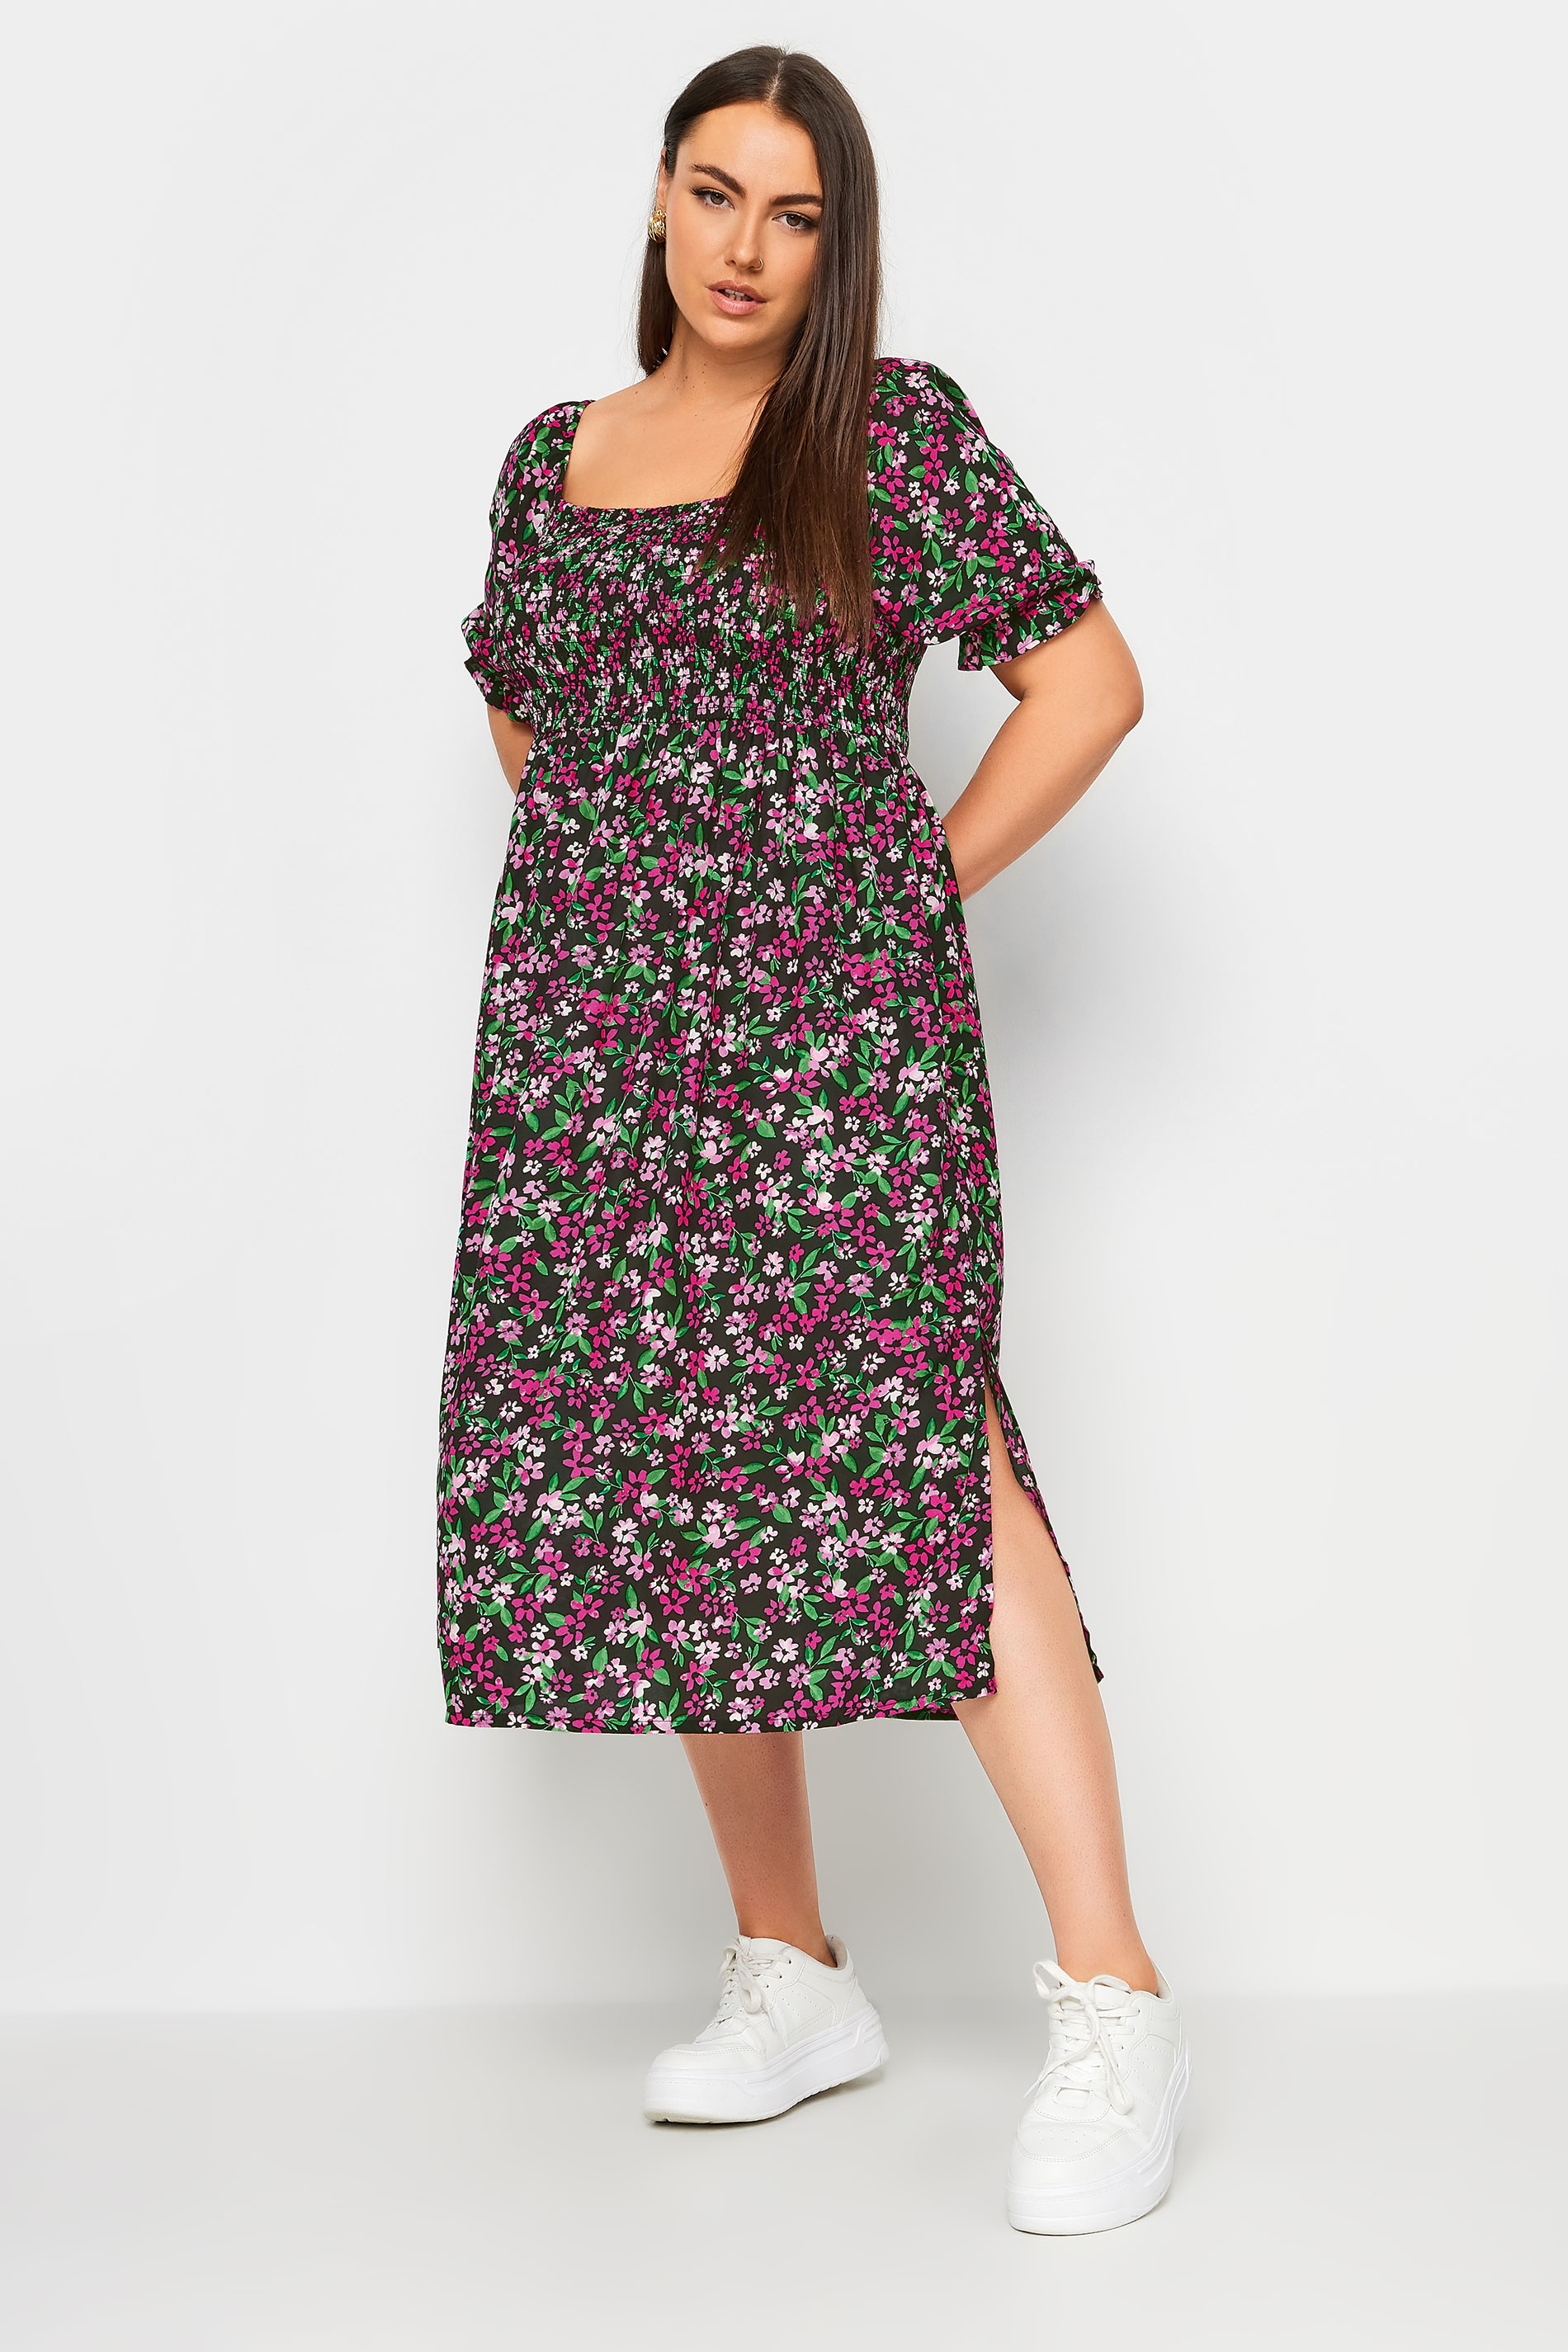 YOURS Plus Size Black & Pink Ditsy Floral Print Shirred Midaxi Dress | Yours Clothing 3